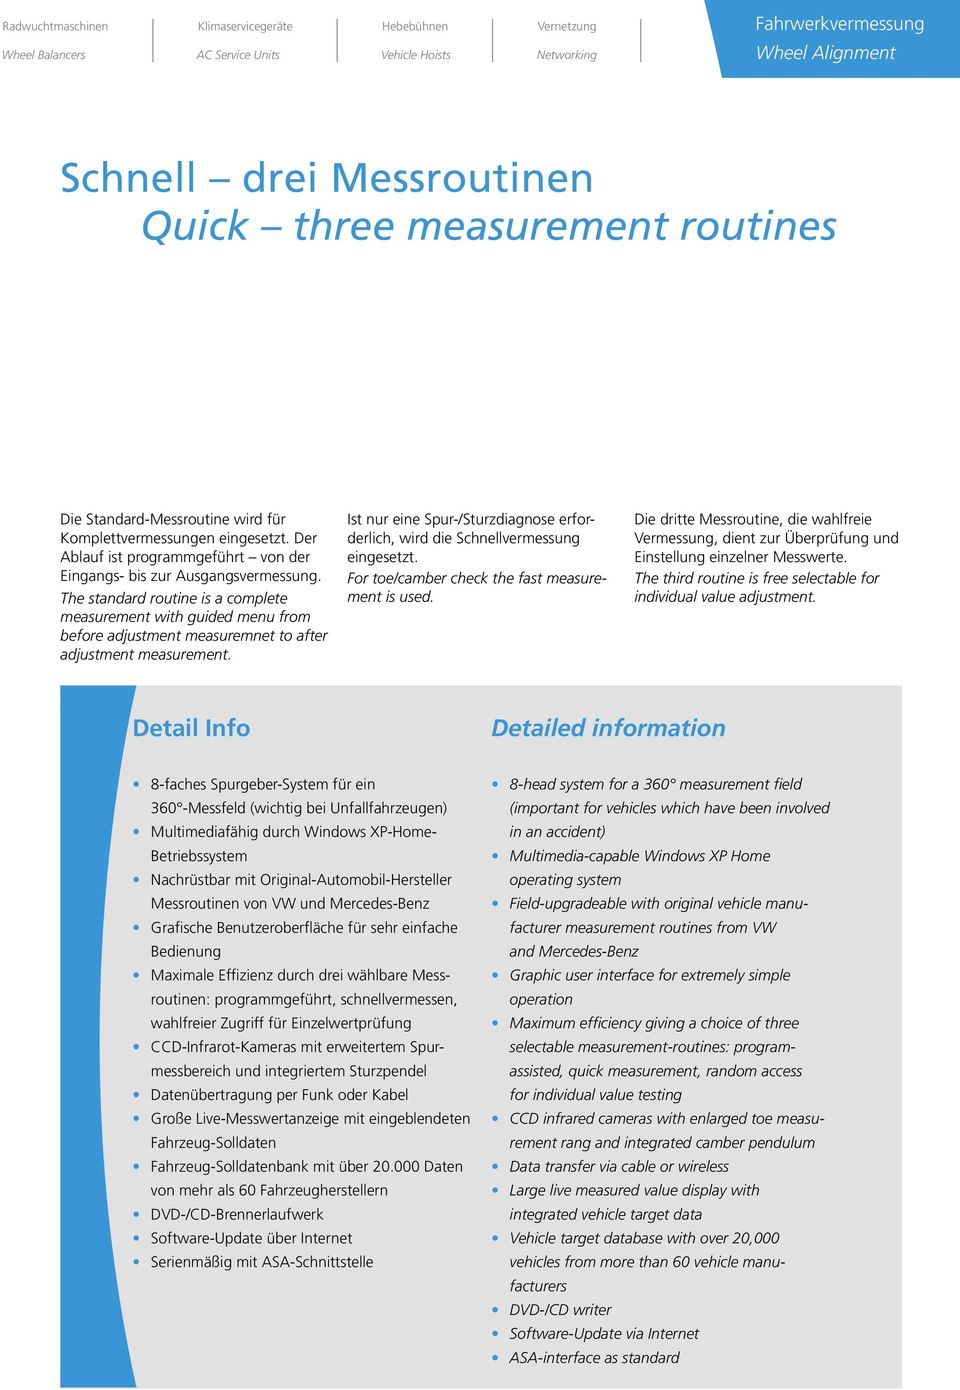 The standard routine is a complete measurement with guided menu from before adjustment measuremnet to after adjustment measurement.